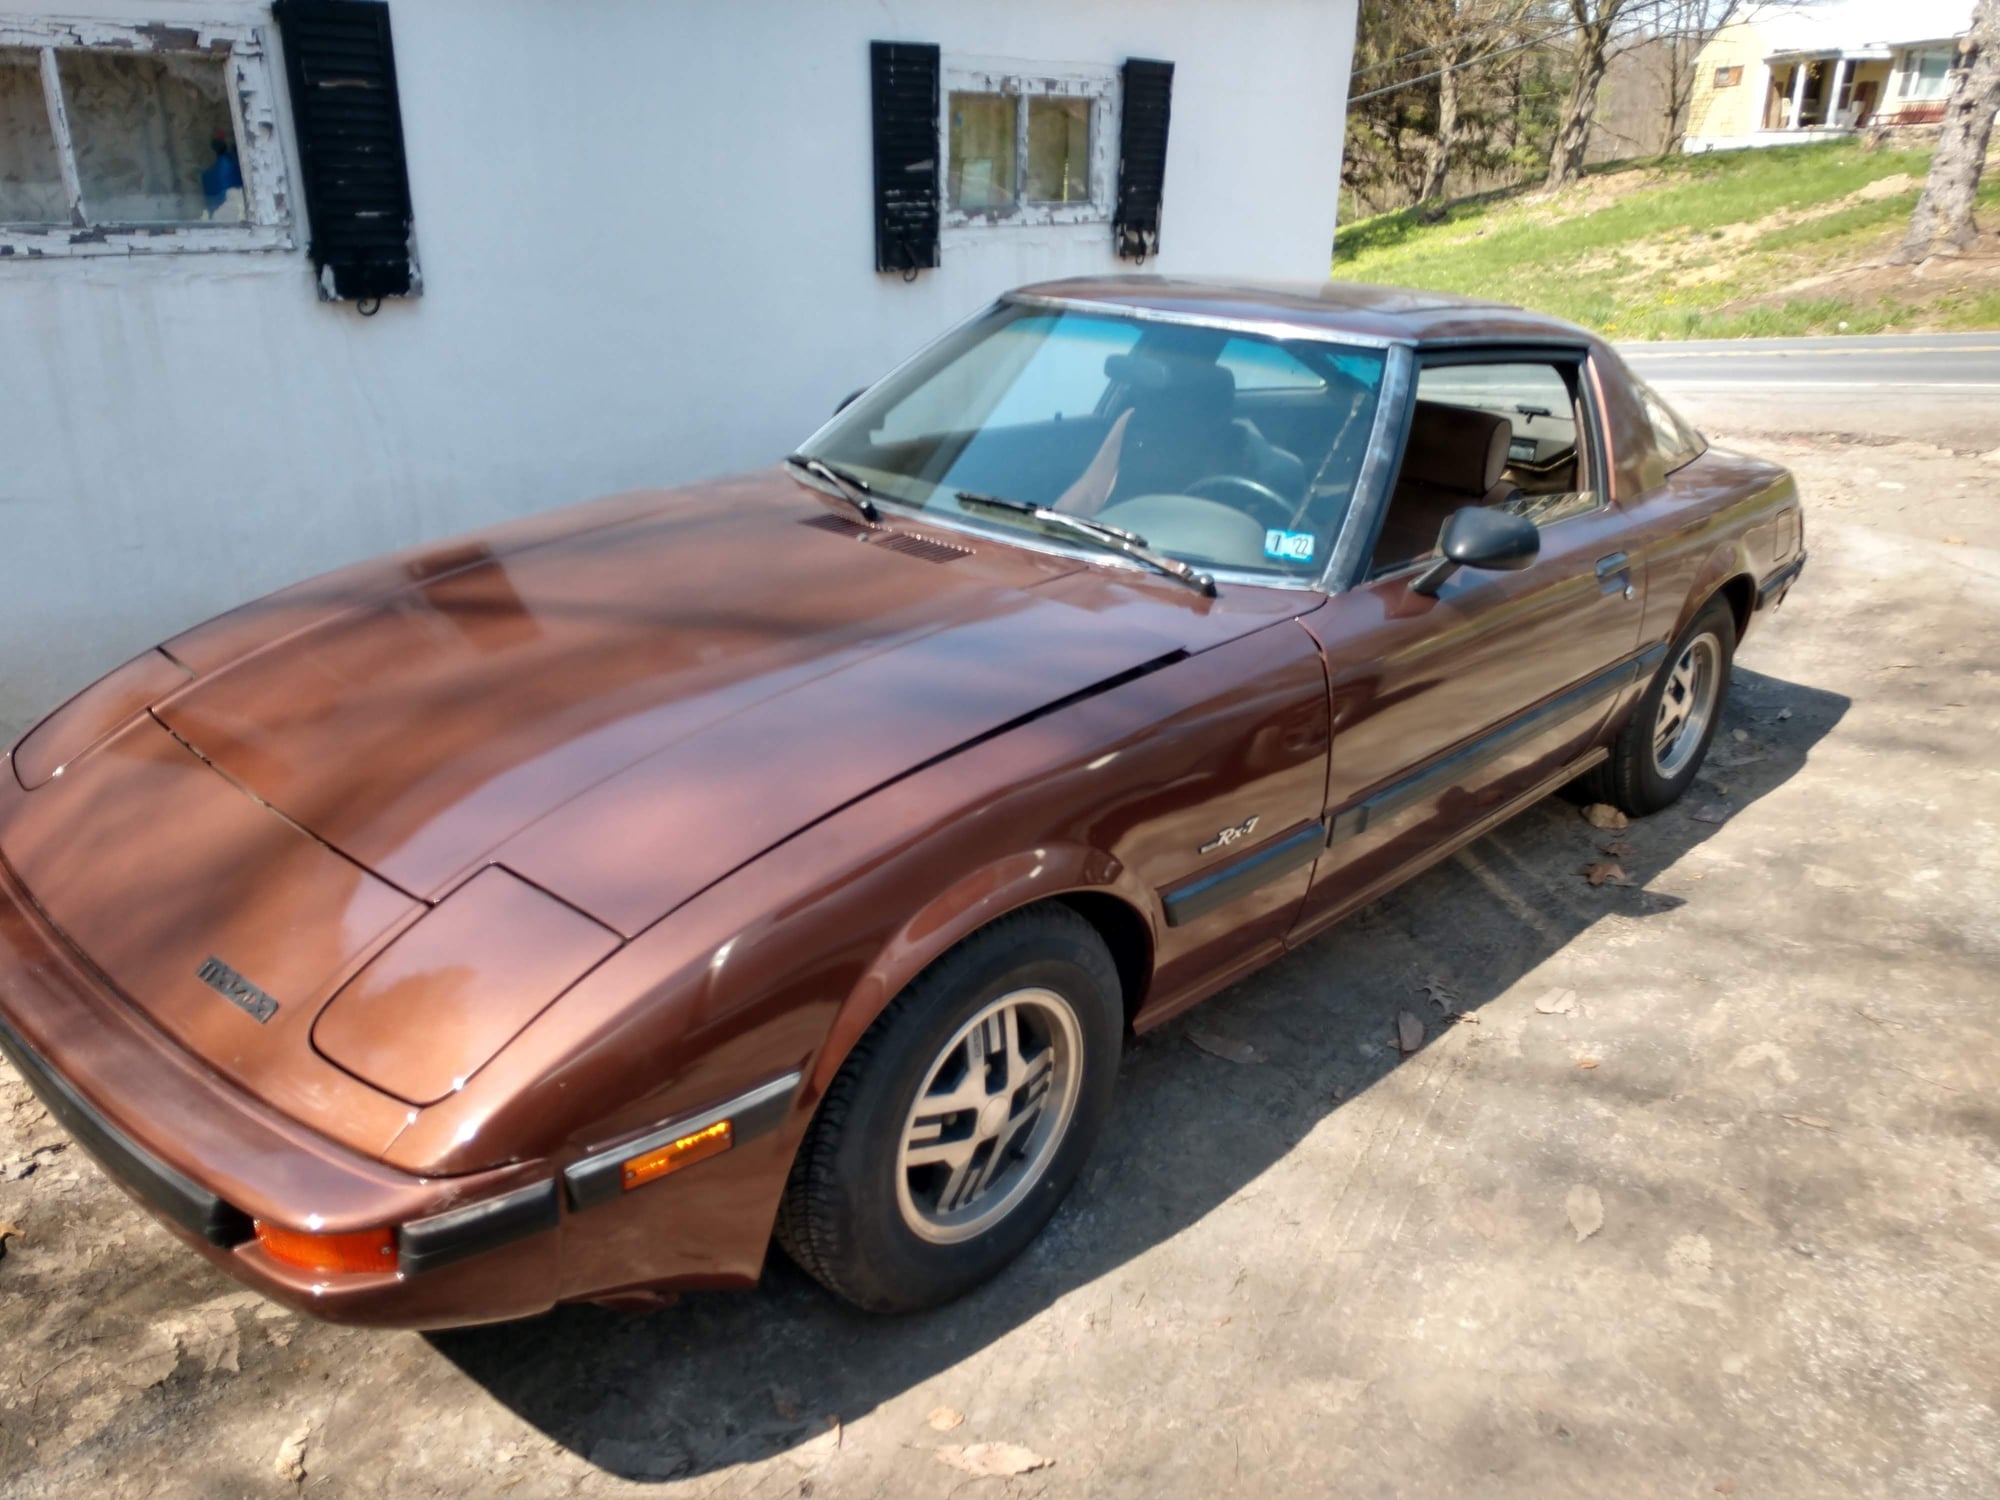 1983 Mazda RX-7 - 1983 Mazda RX7 - Used - VIN JM1FB3313D0739928 - 111,656 Miles - Other - 2WD - Coupe - Brown - Bloomsburg, PA 17815, United States